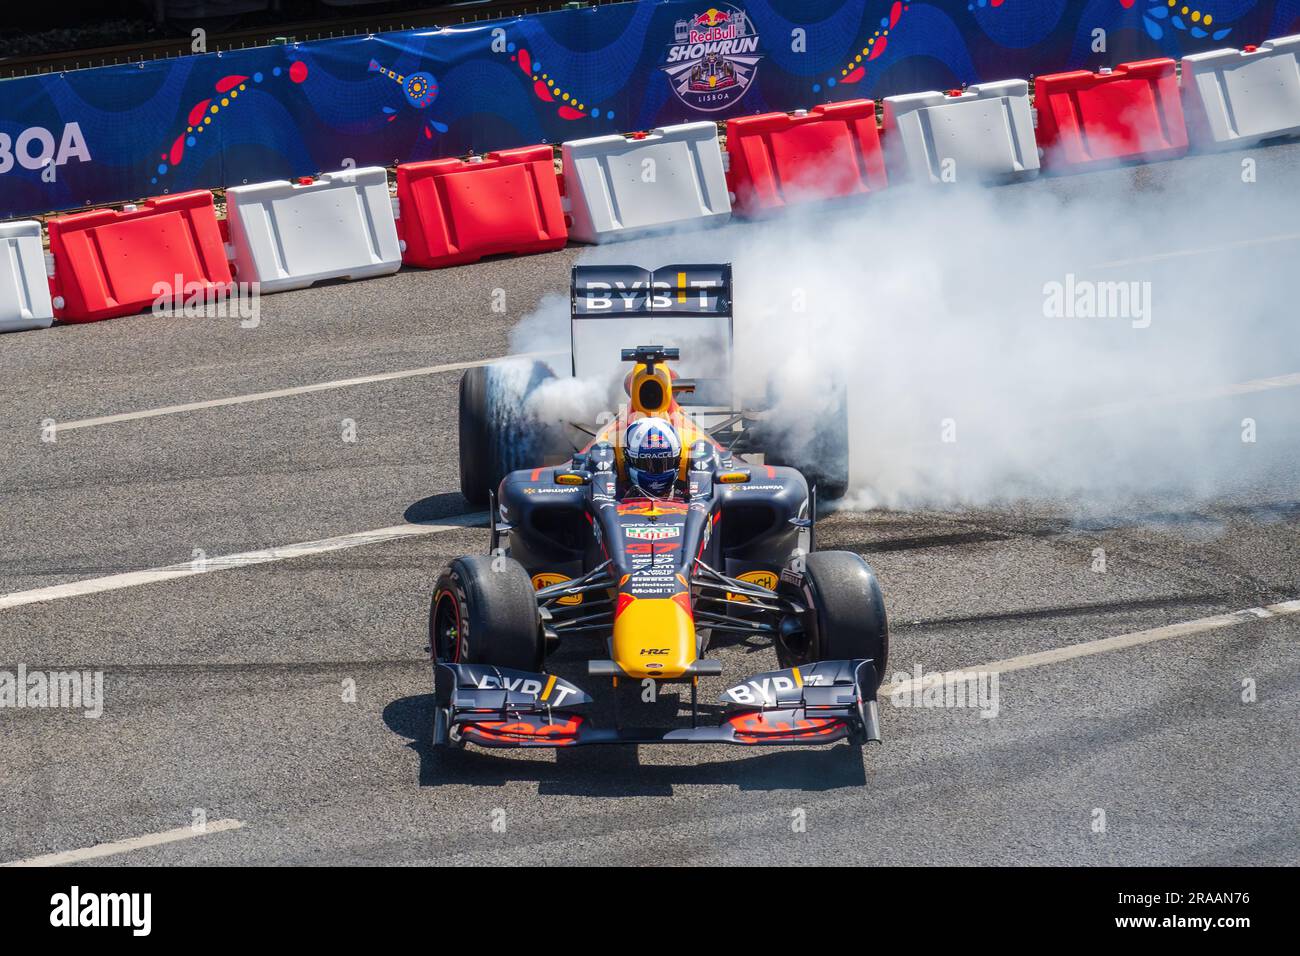 Red Bull Showrun Lisboa 2023. Formula 1 show for motorsports fans in Lisbon, Portugal. David Coulthard driving the Red Bull RB7 Formula 1 racing car. Stock Photo